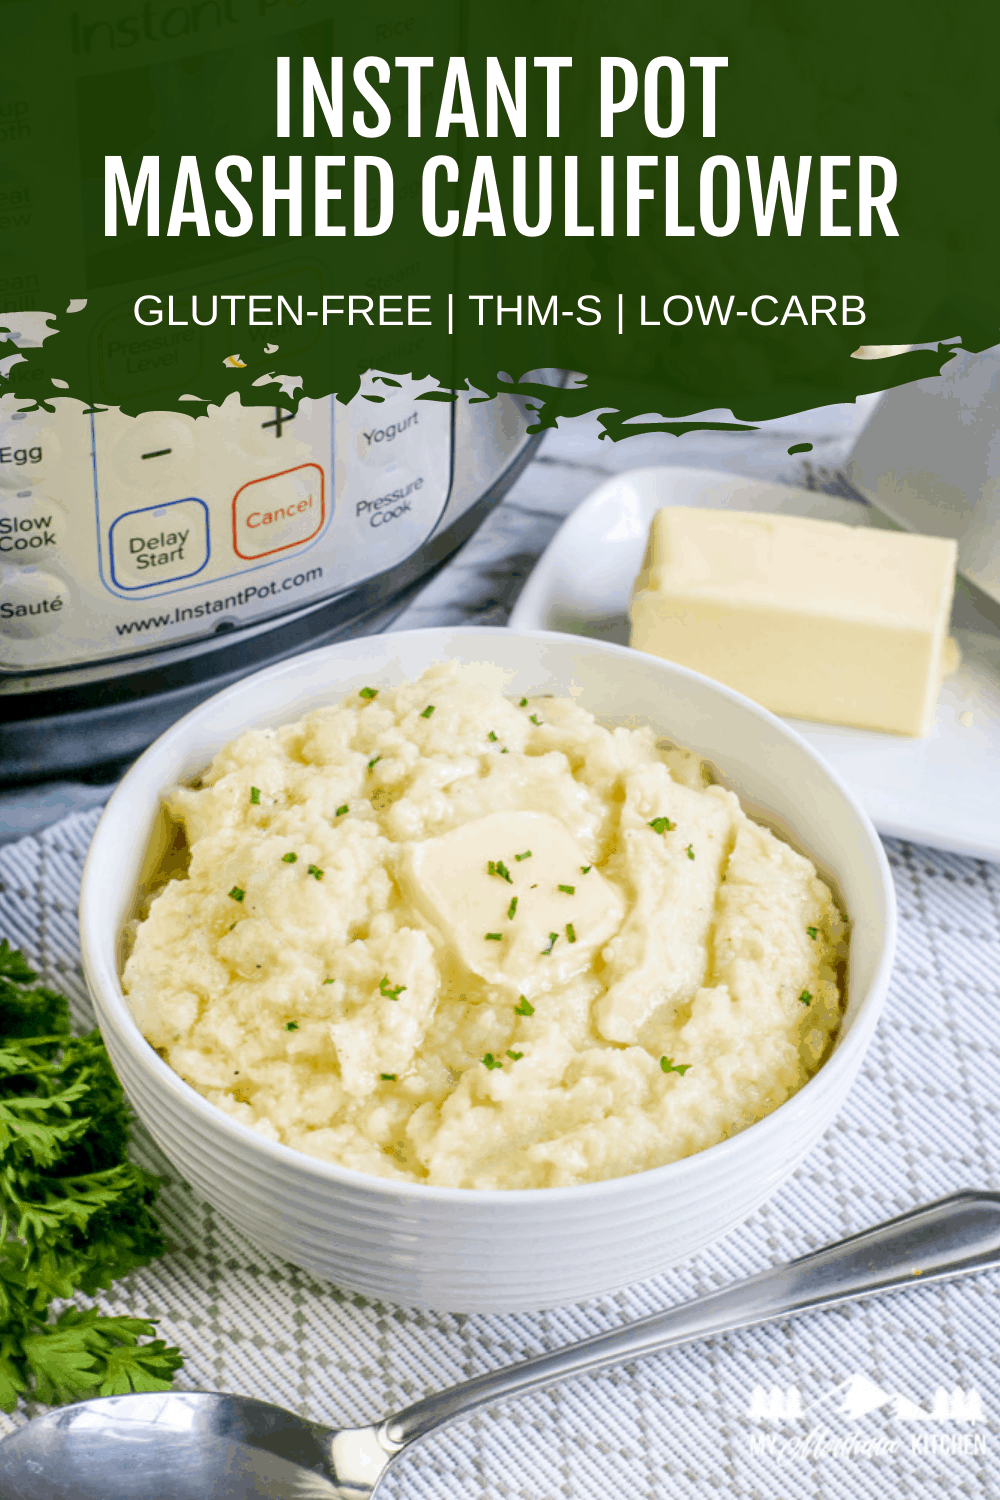 Low-Carb Mashed Cauliflower recipe made in your instant pot. Using fresh cauliflower instead of frozen, and using your instant pot makes this recipe super easy! Delicious keto mashed potatoes substitute.